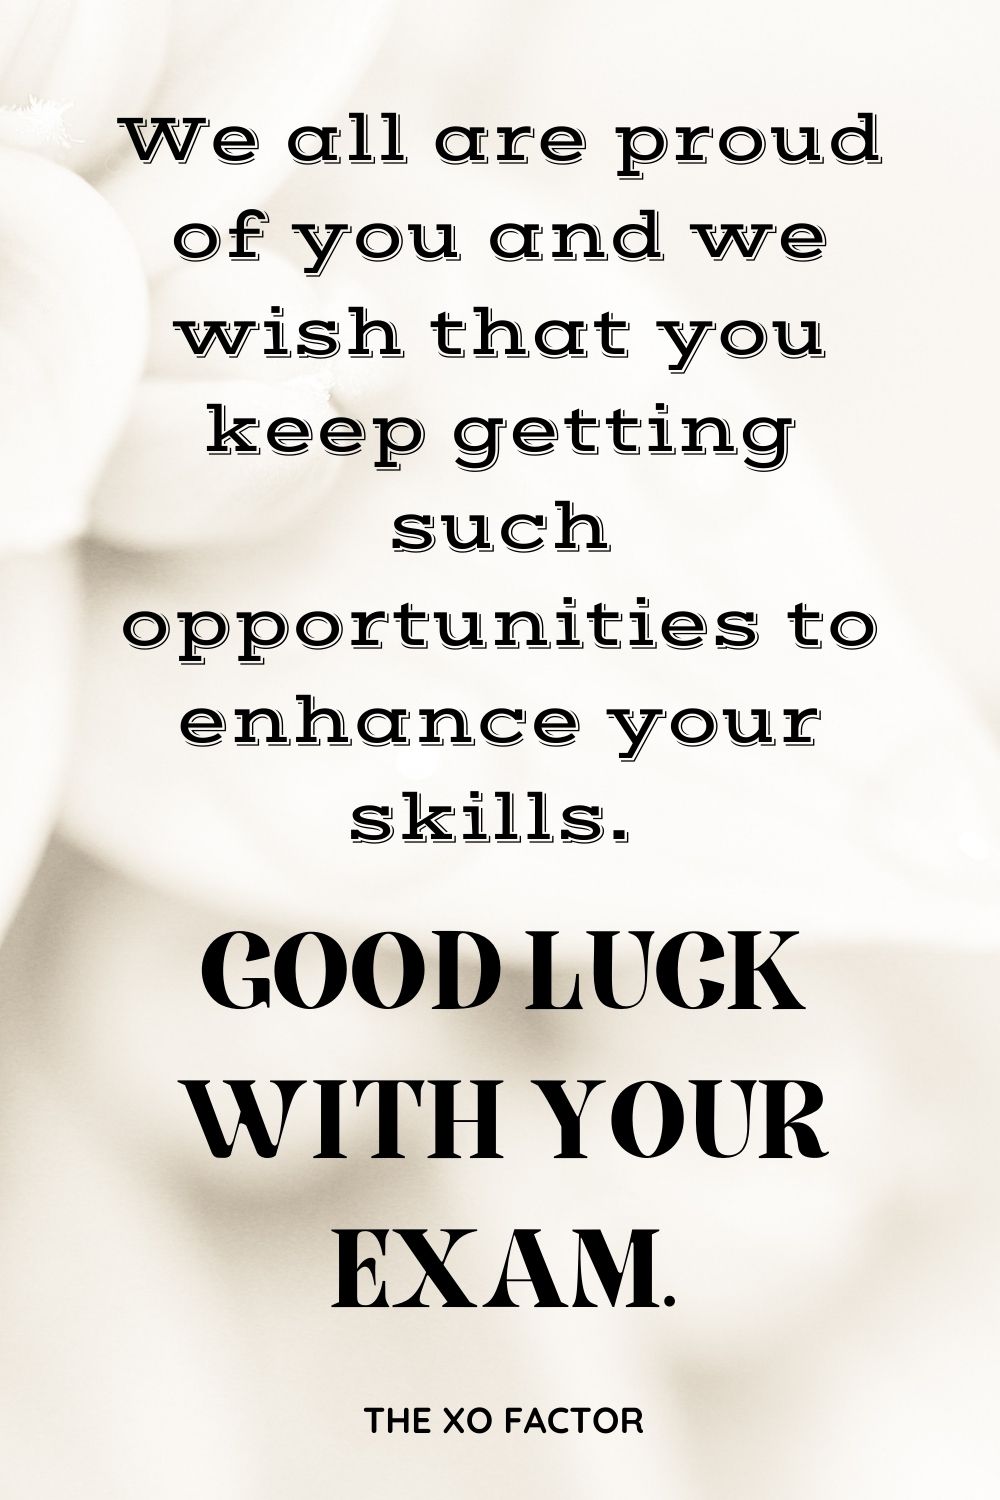 We all are proud of you and we wish that you keep getting such opportunities to enhance your skills. Good luck with your exam.